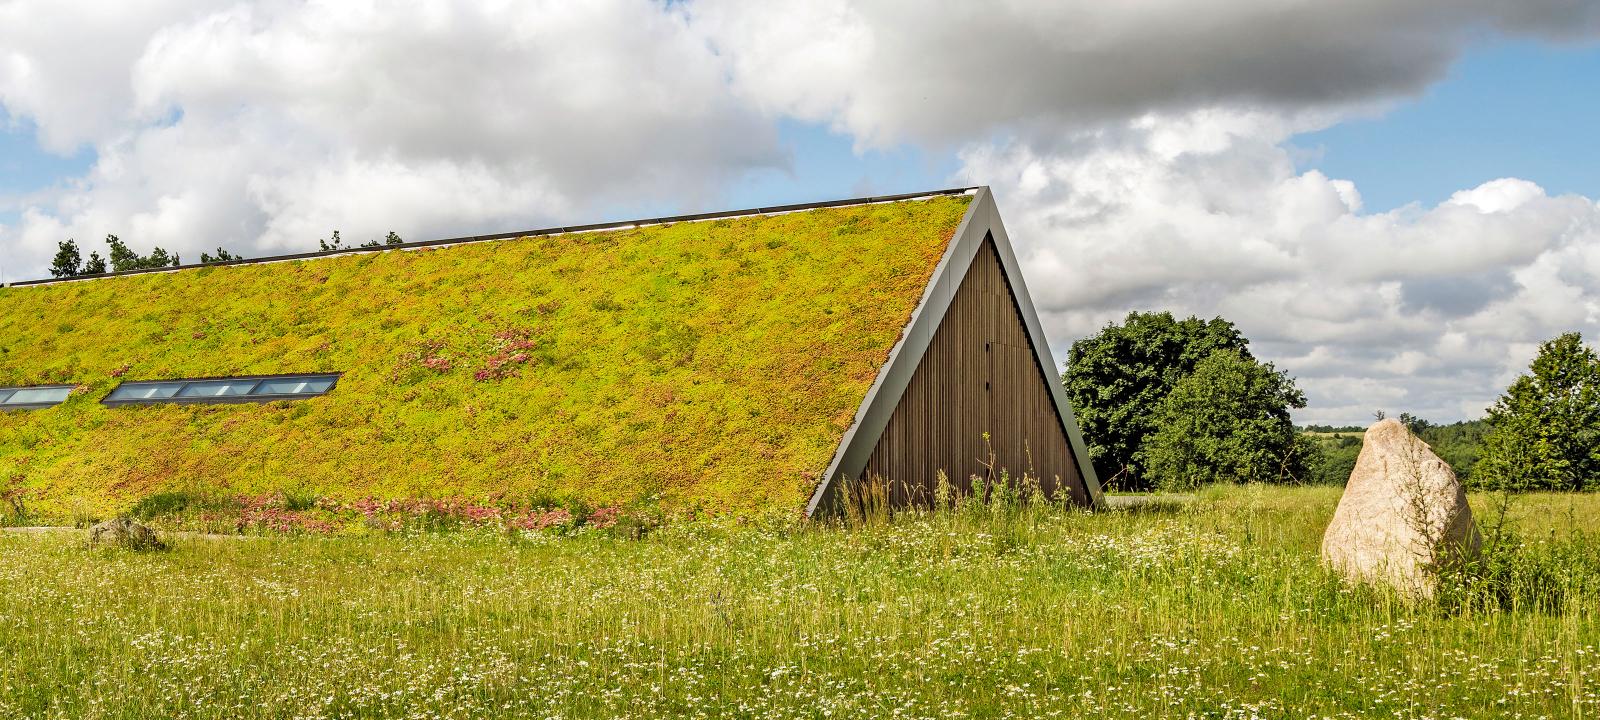 Steep Pitched Green Roof